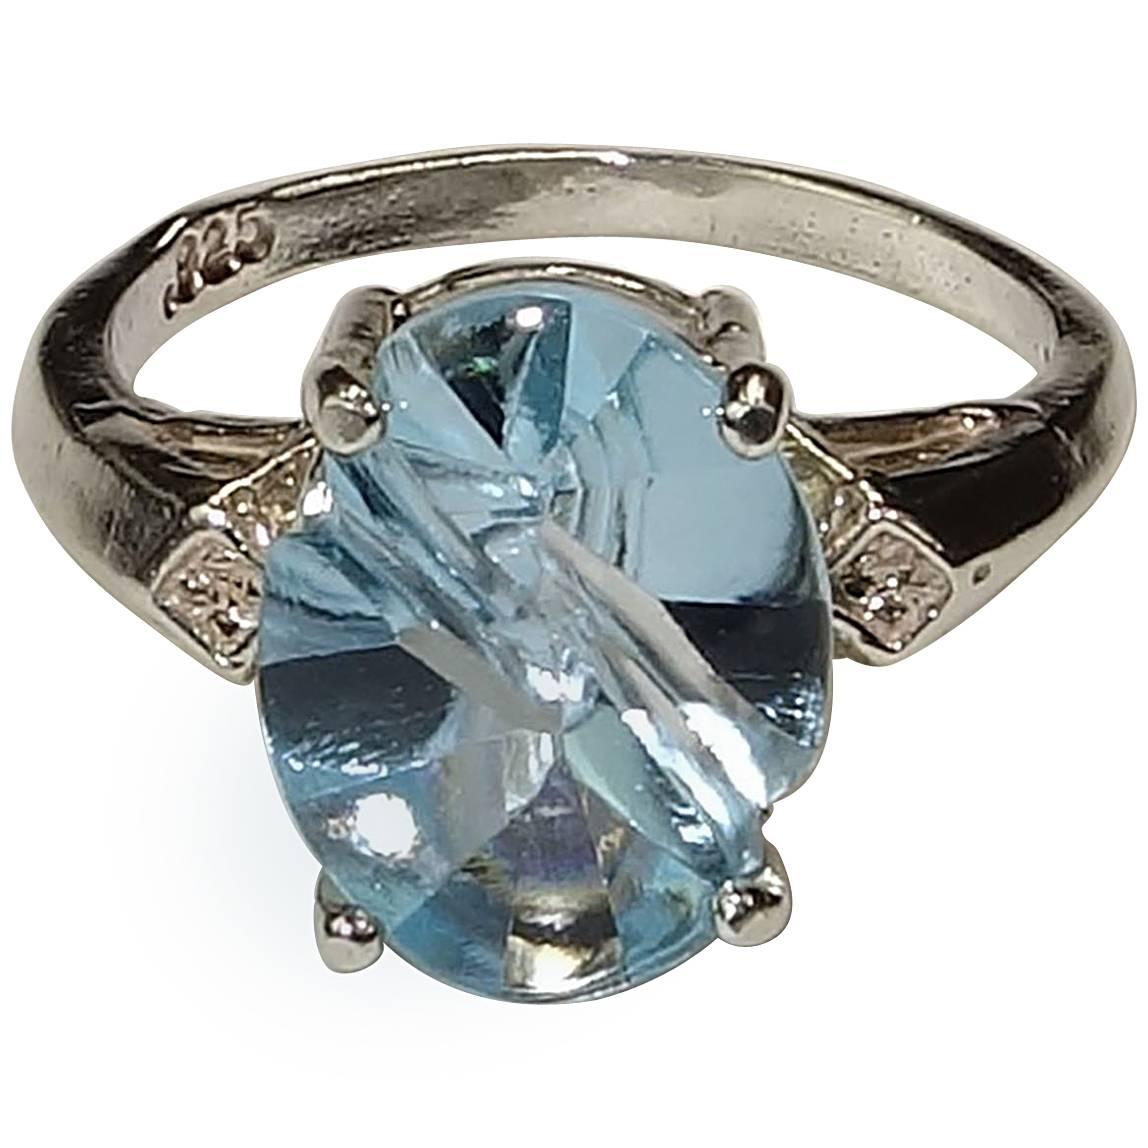 This is one of those beautiful, custom made, just perfectly sized oval blue topaz rings that longs to find a home on your finger. I love unique fantasy cuts and this is no exception. Topaz is November's birthstone.
Size 7.5
More from this seller by